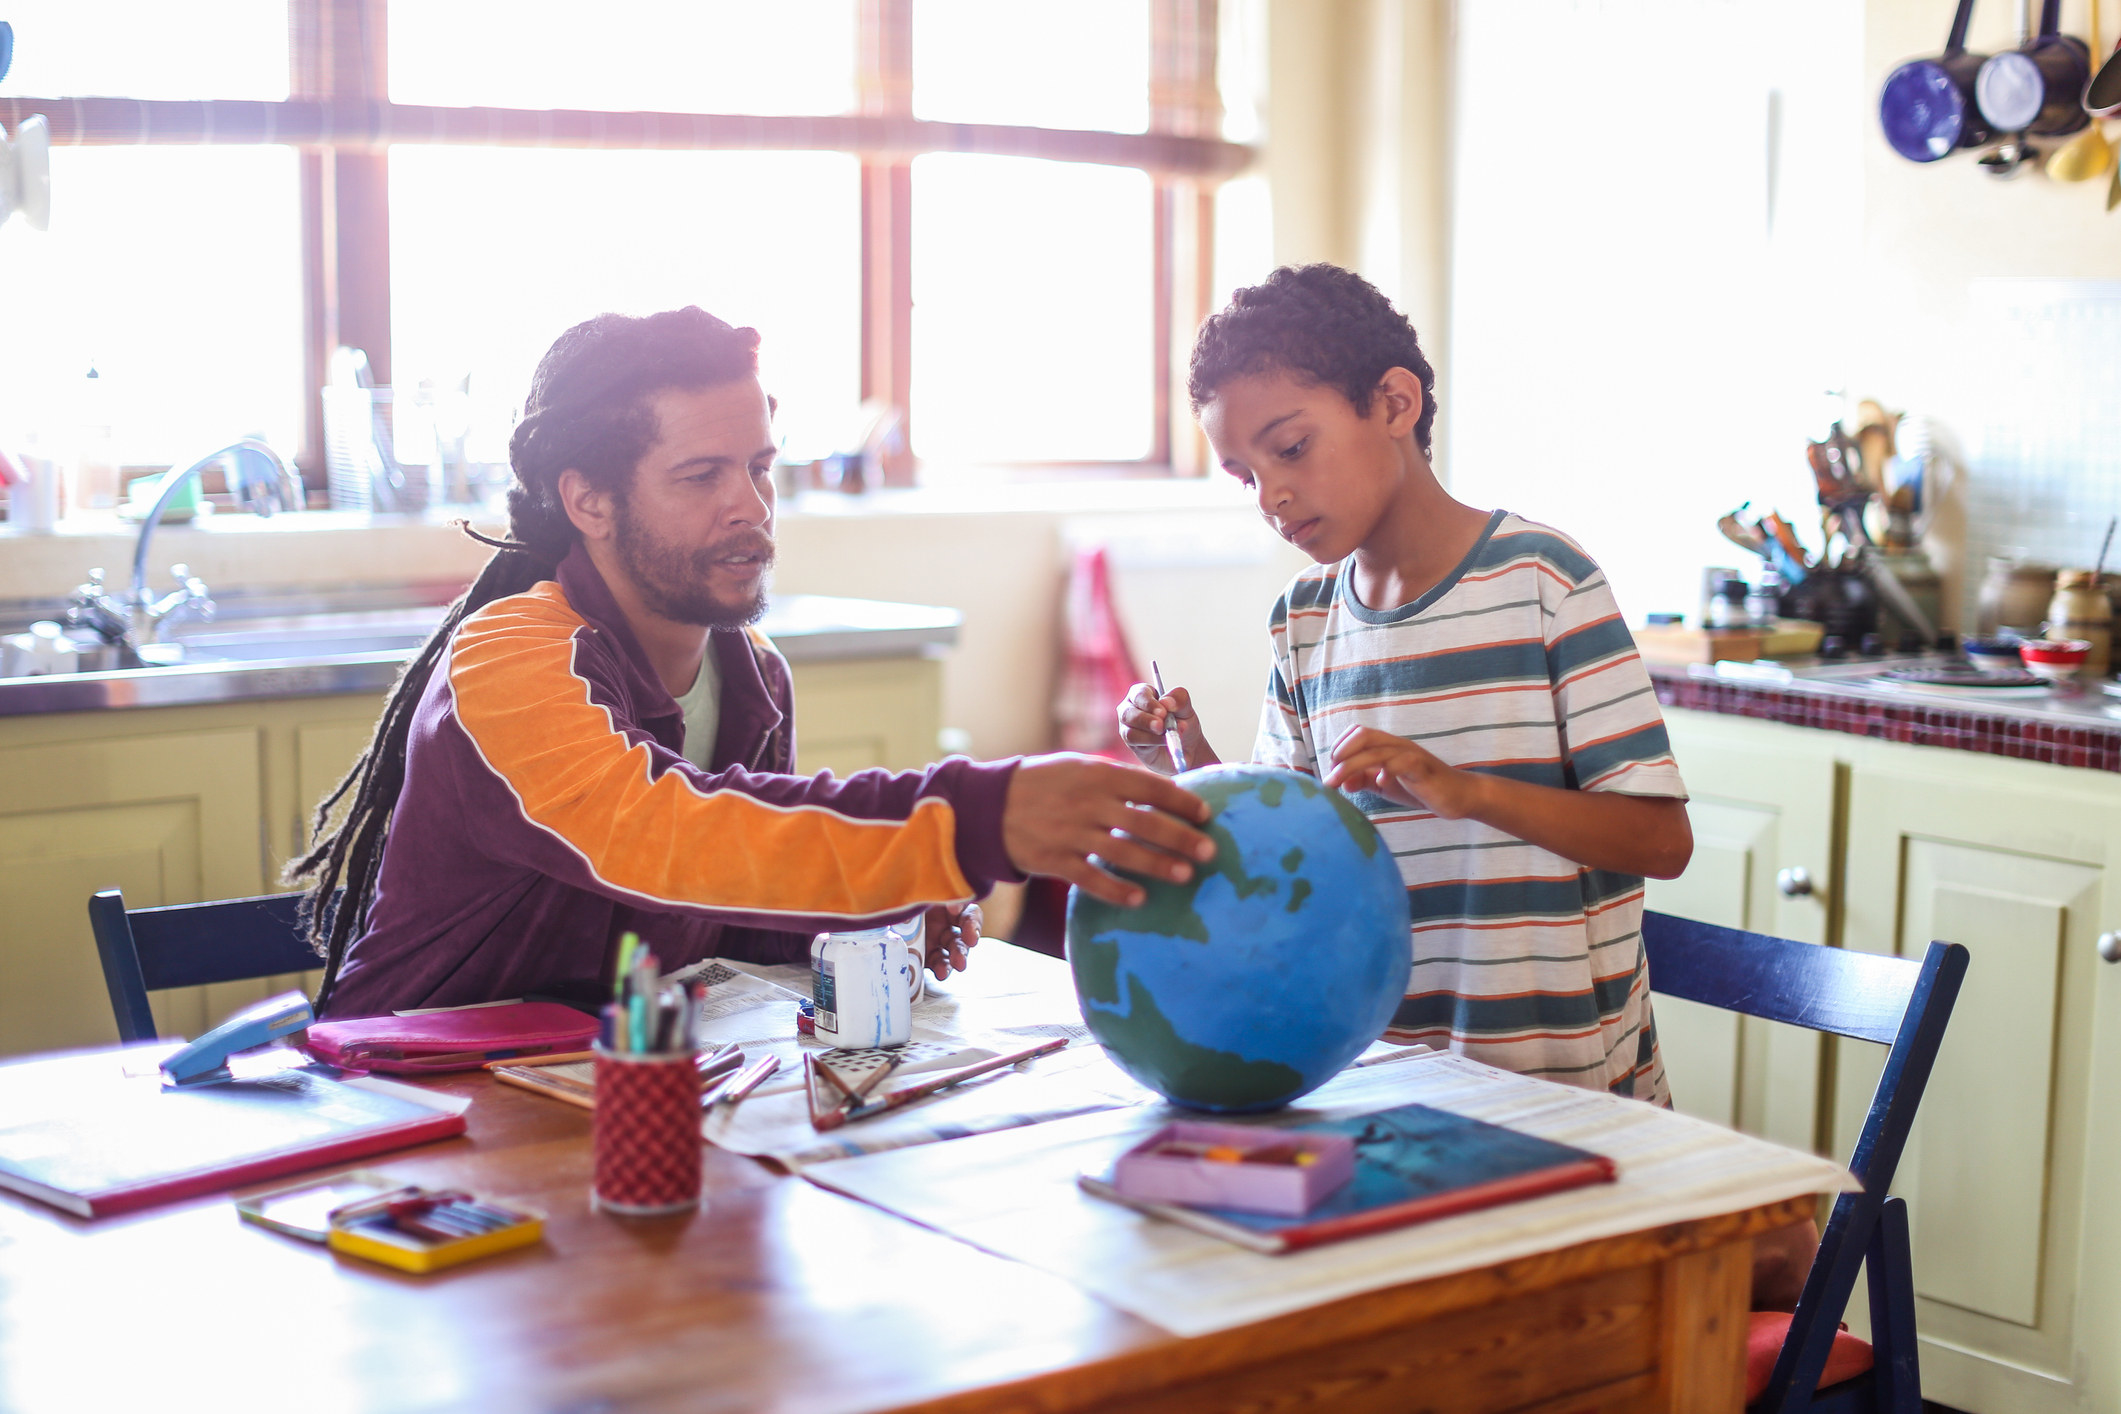 Teacher showing globe to student in classroom. 